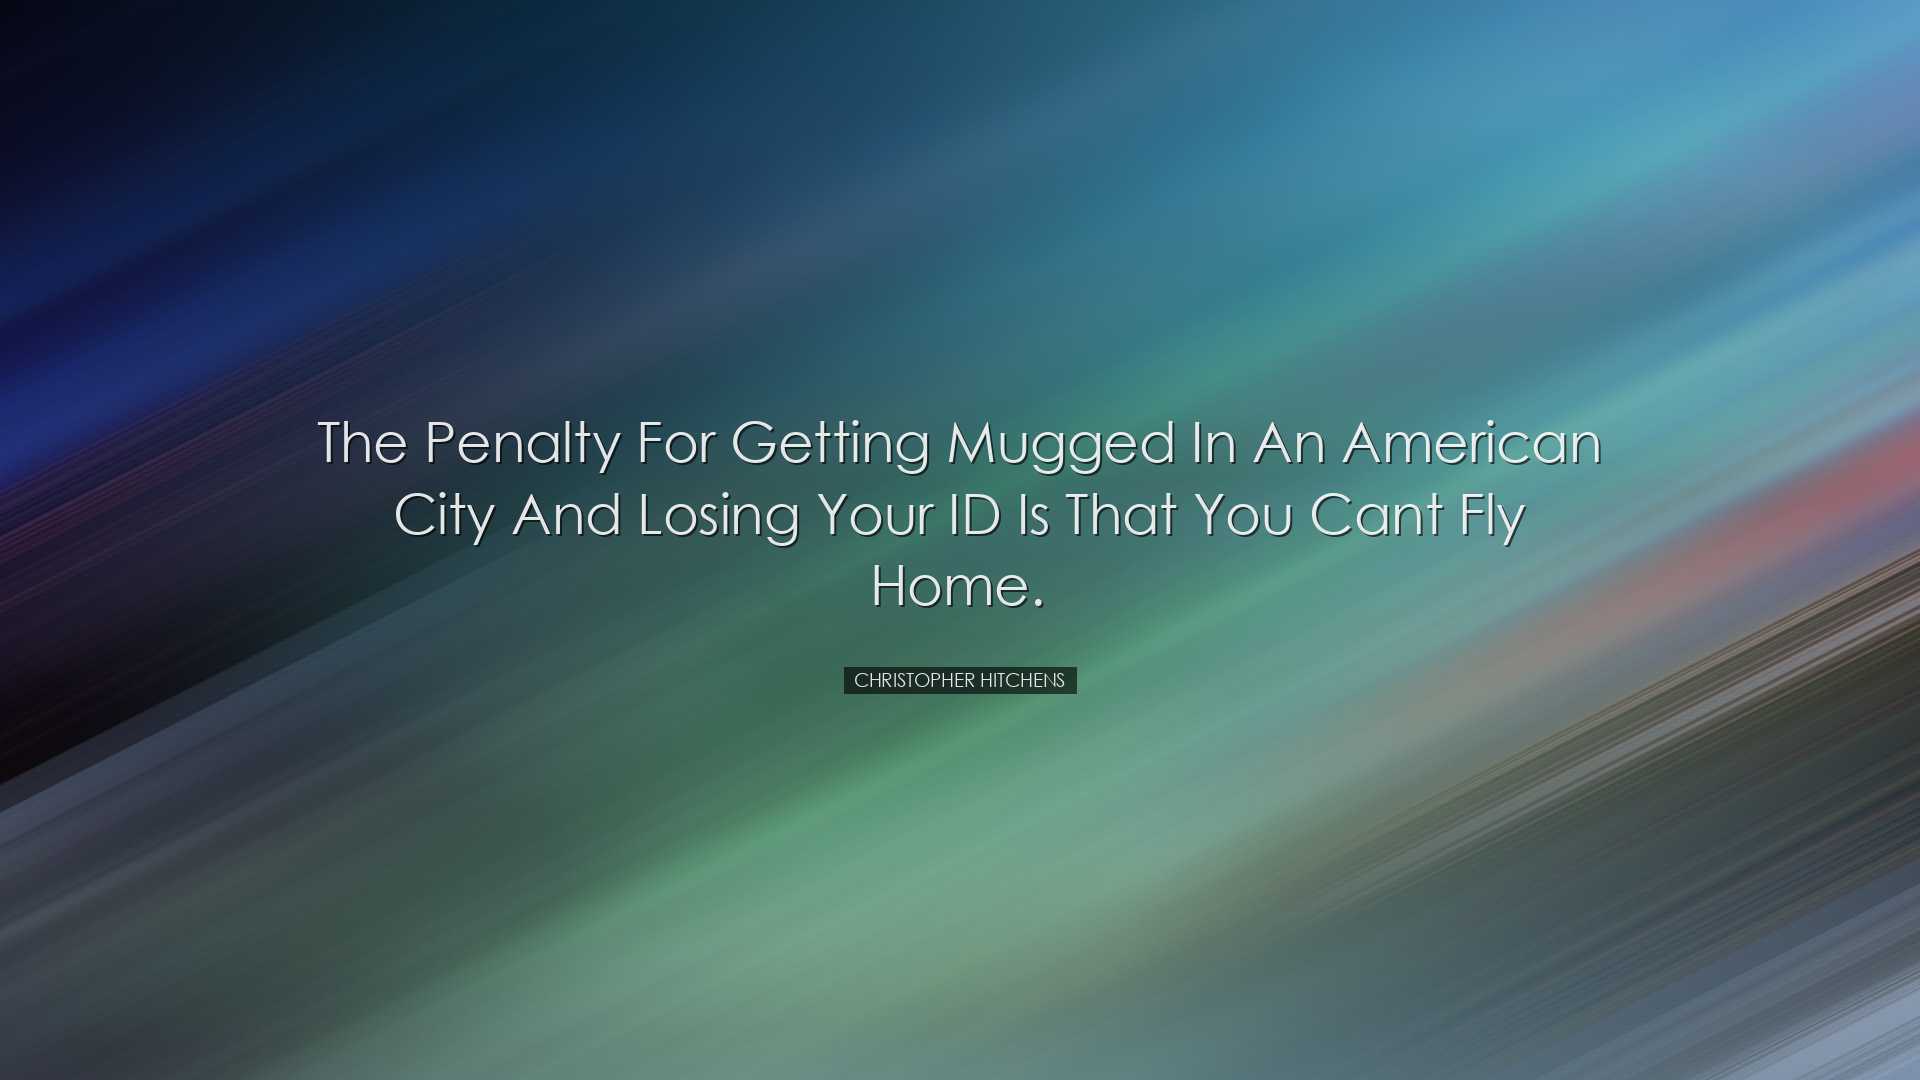 The penalty for getting mugged in an American city and losing your